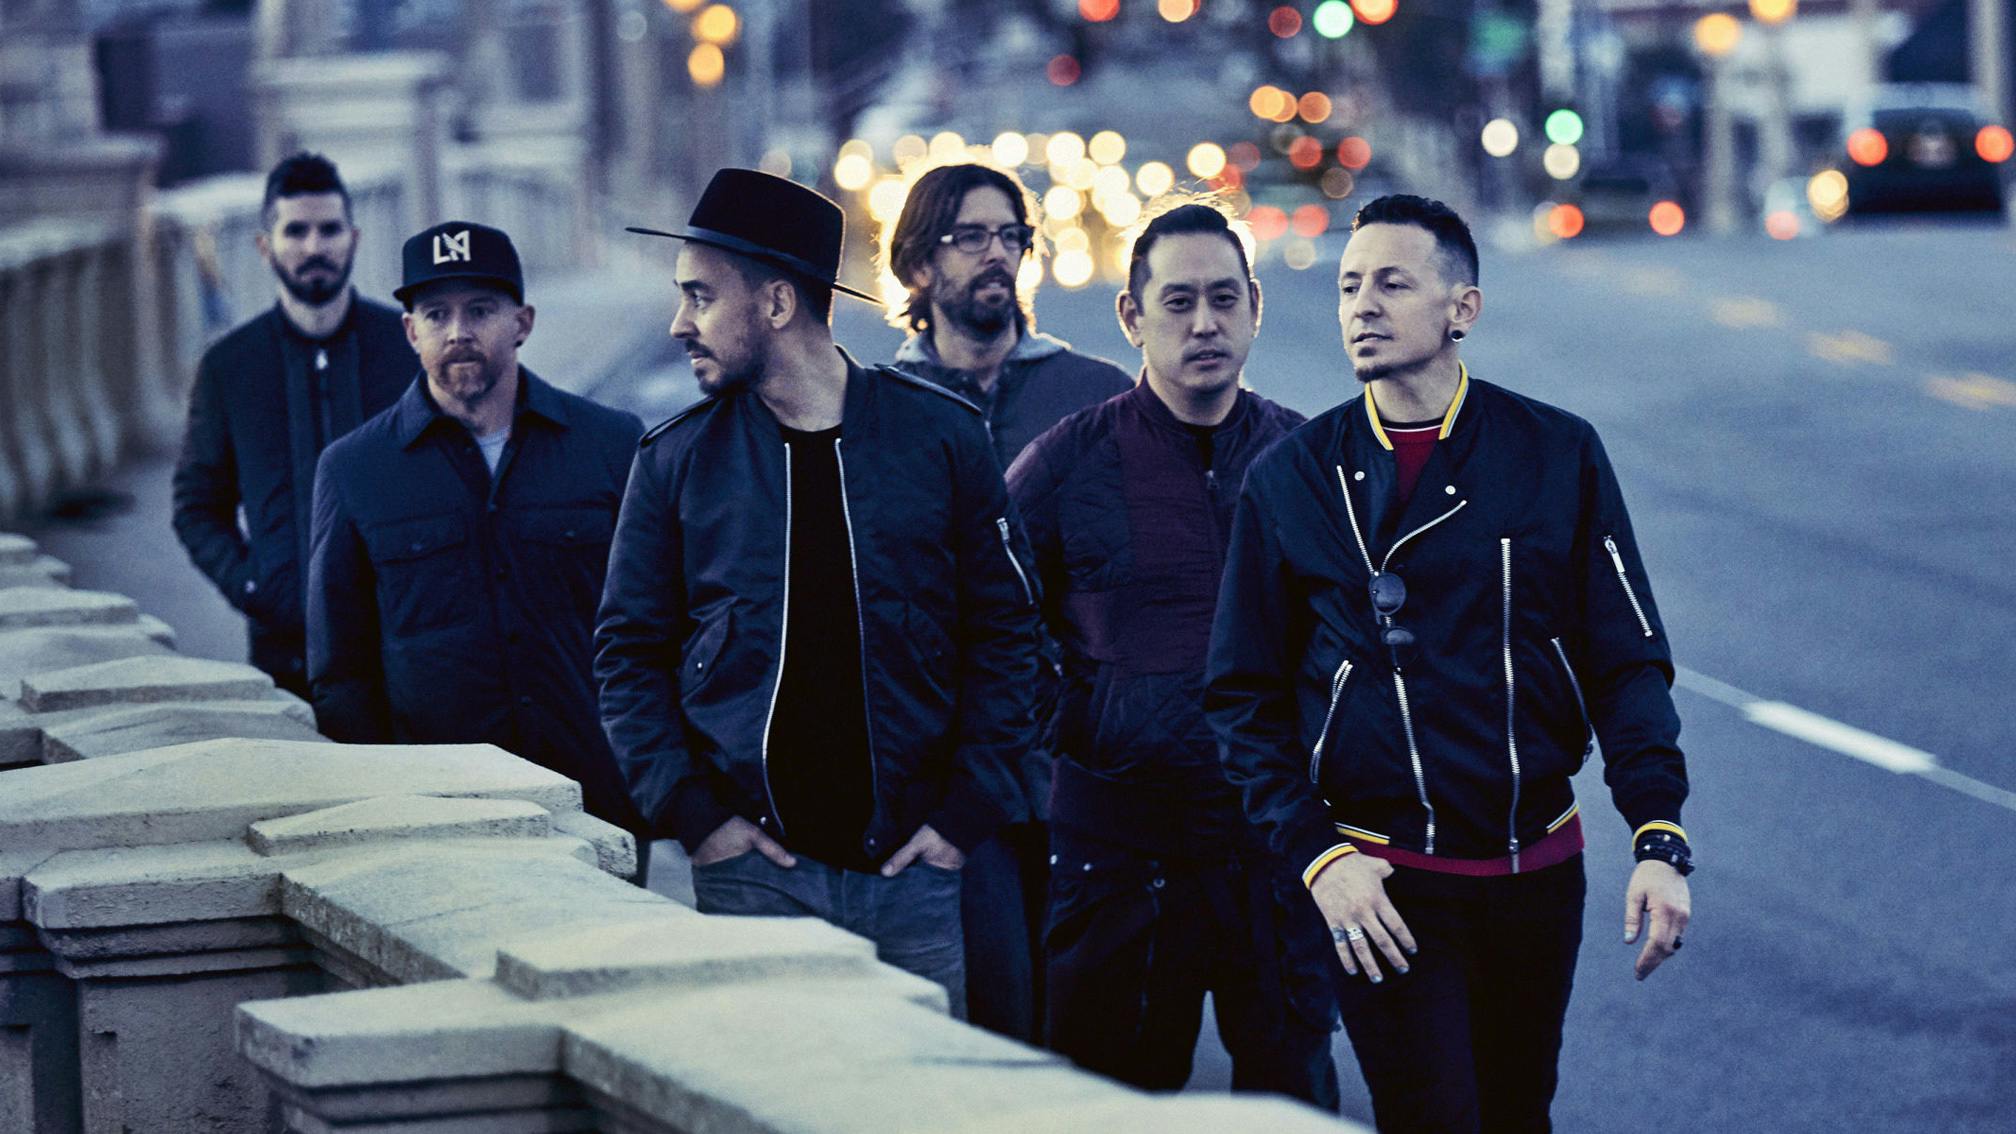 Linkin Park Have At Least One Unreleased Song With Chester Bennington's Vocals